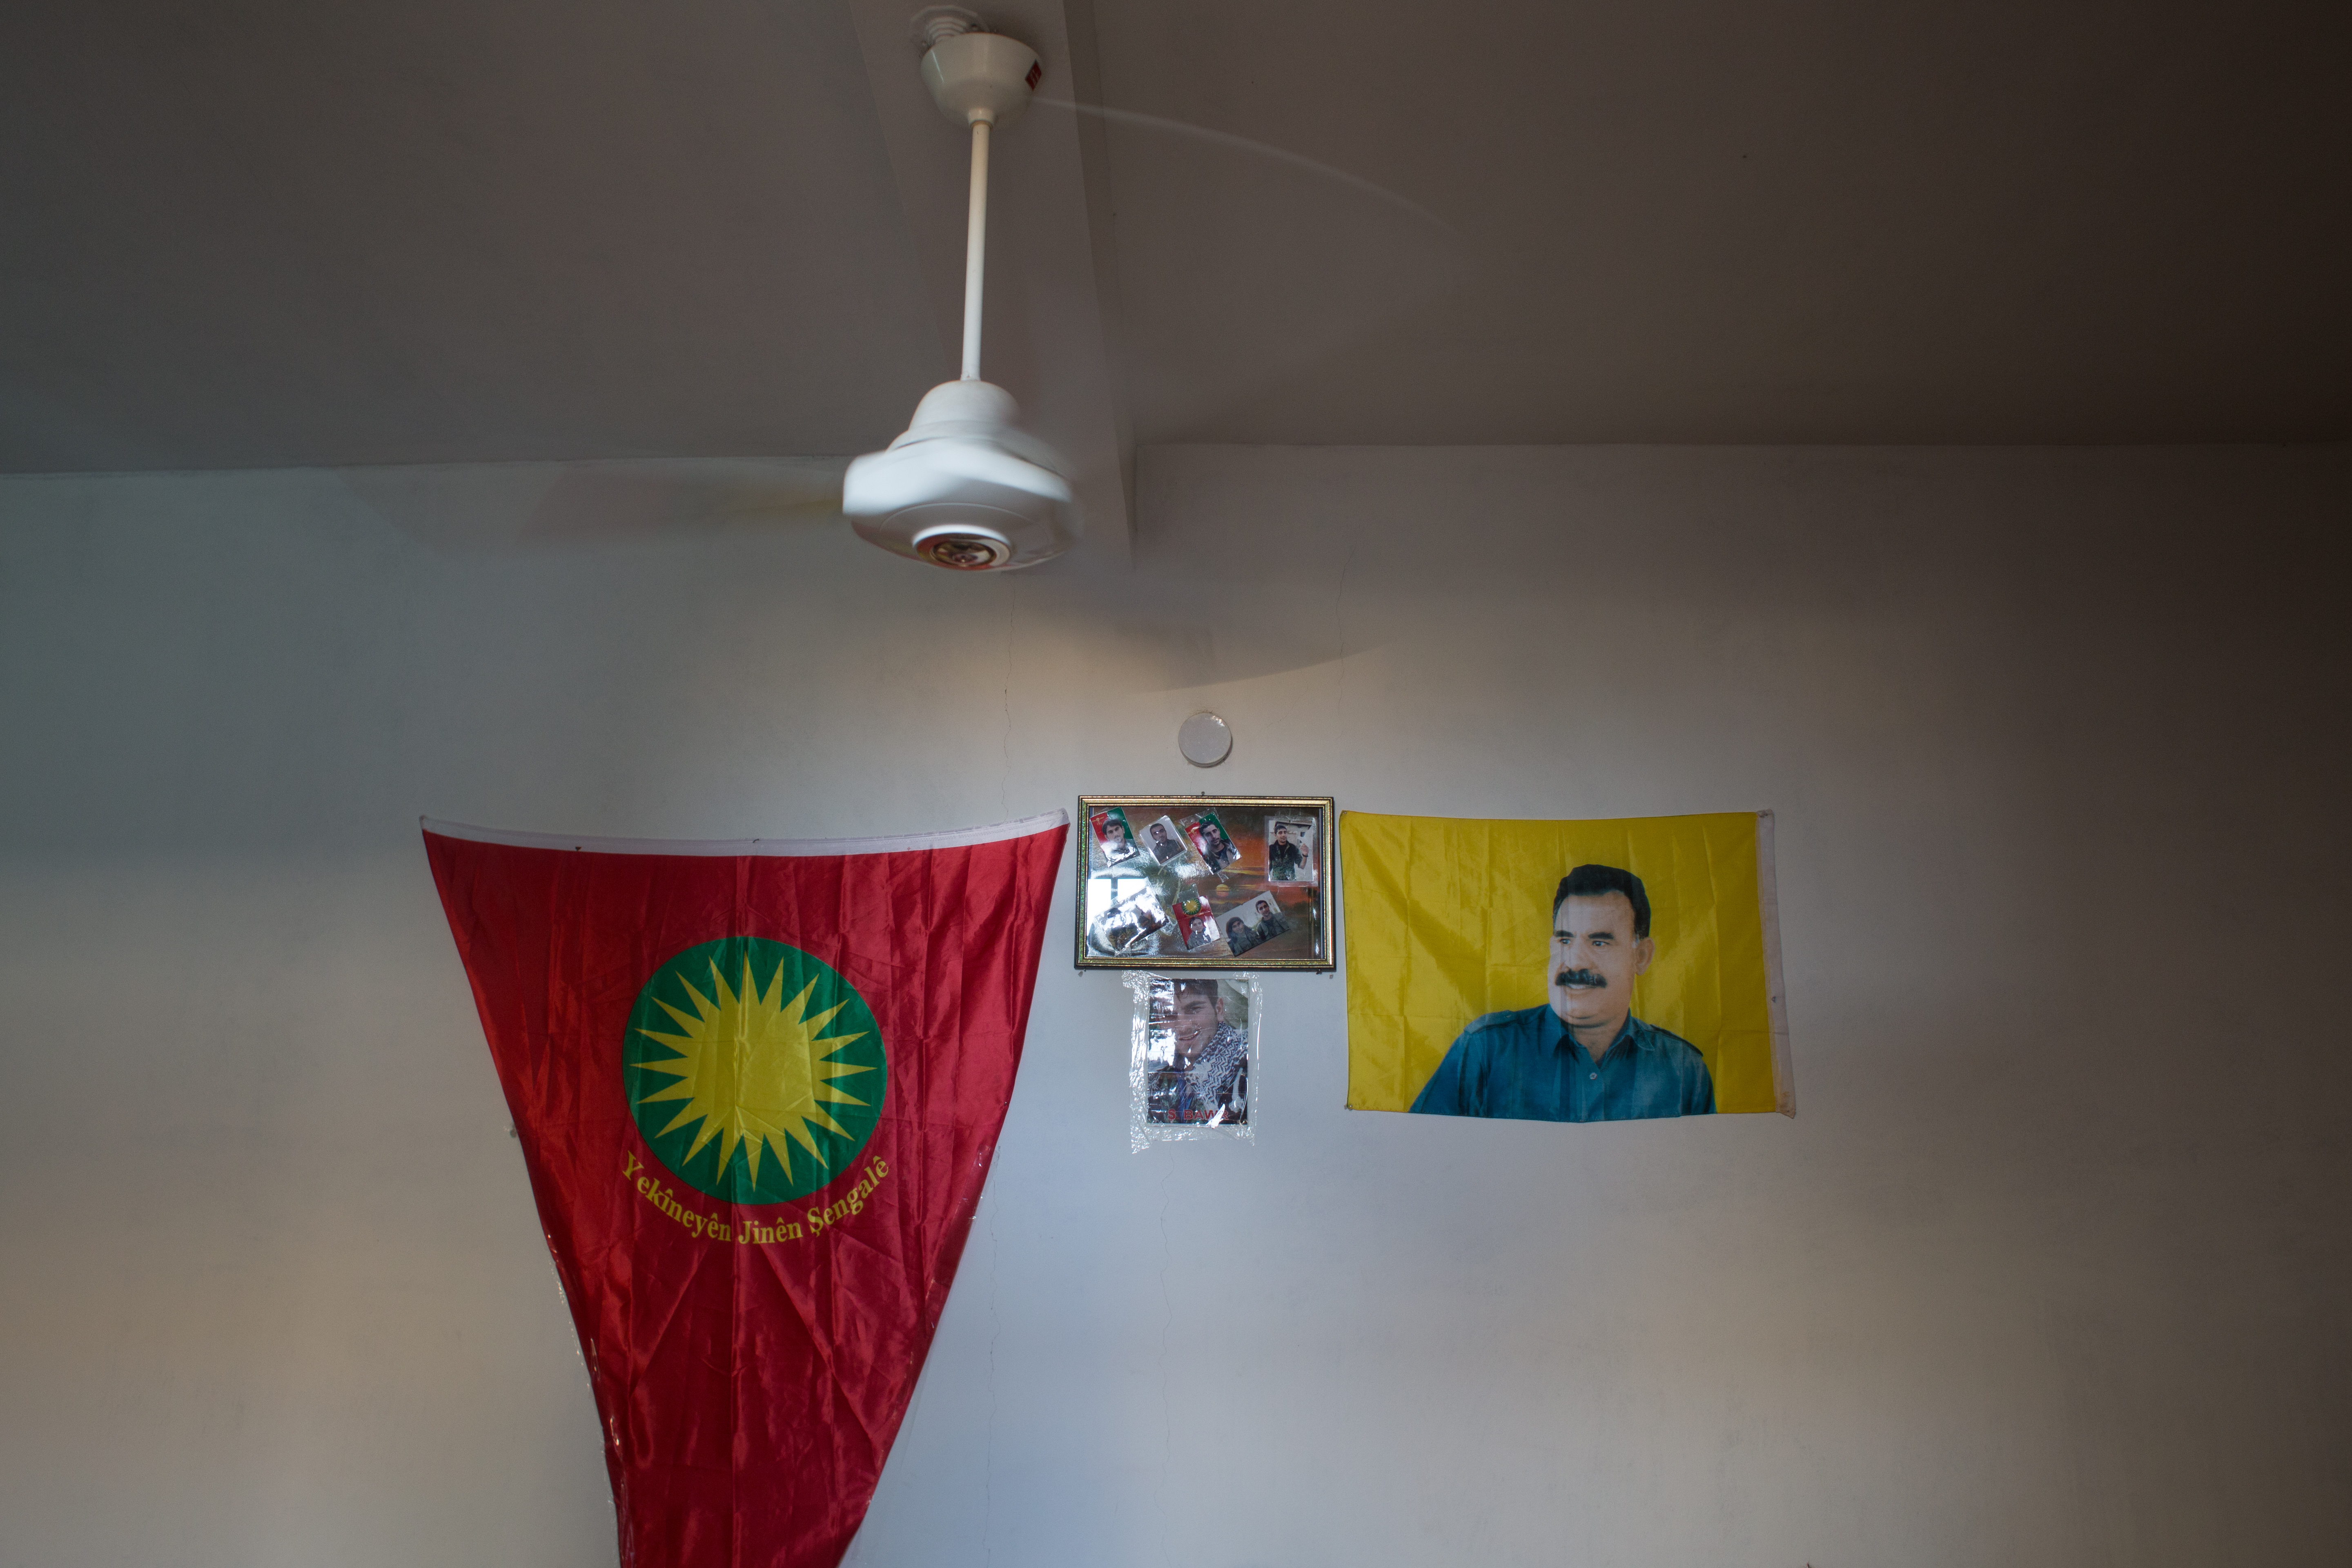 In all of Rojava's public buildings images of the Kurdish sun and Ocalan, one of the PKK's founders, are omnipresent.